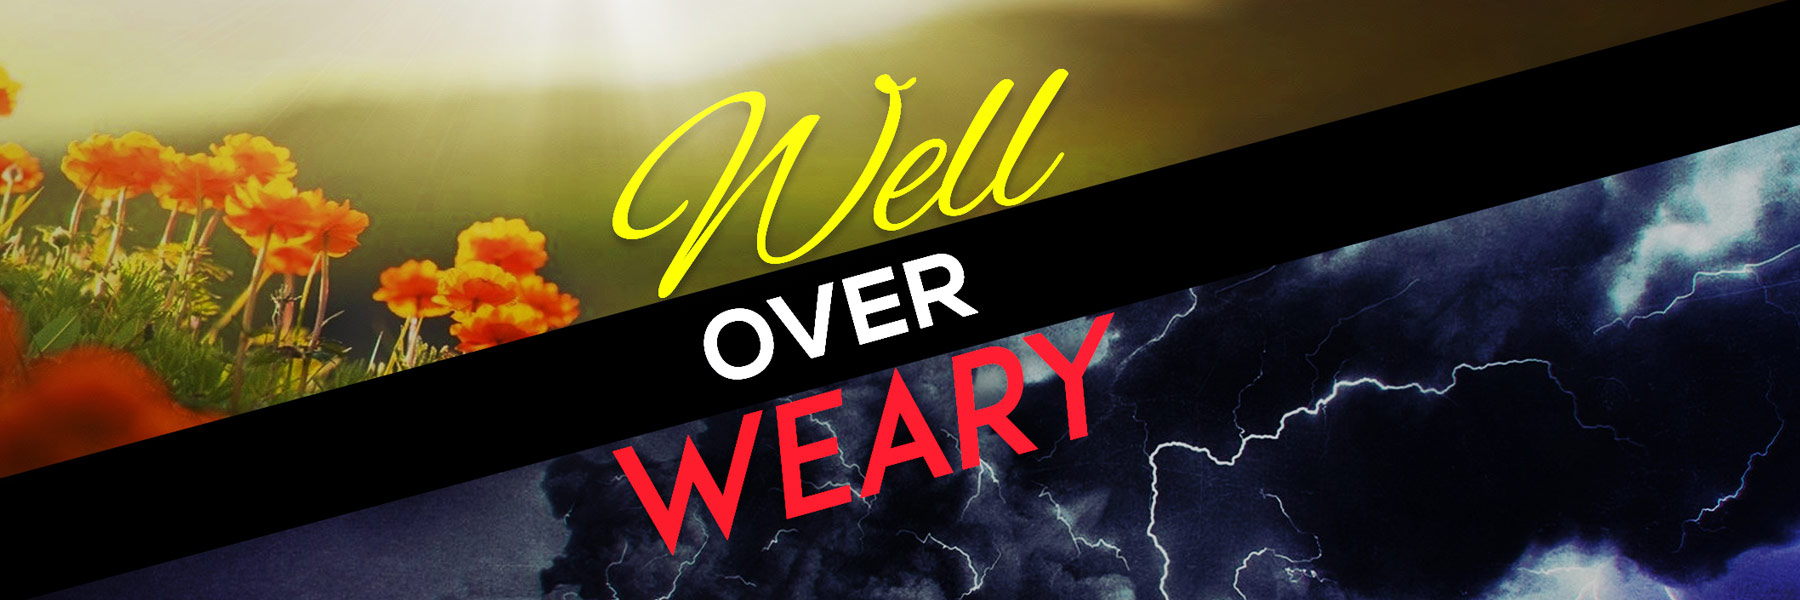 Well Over Weary